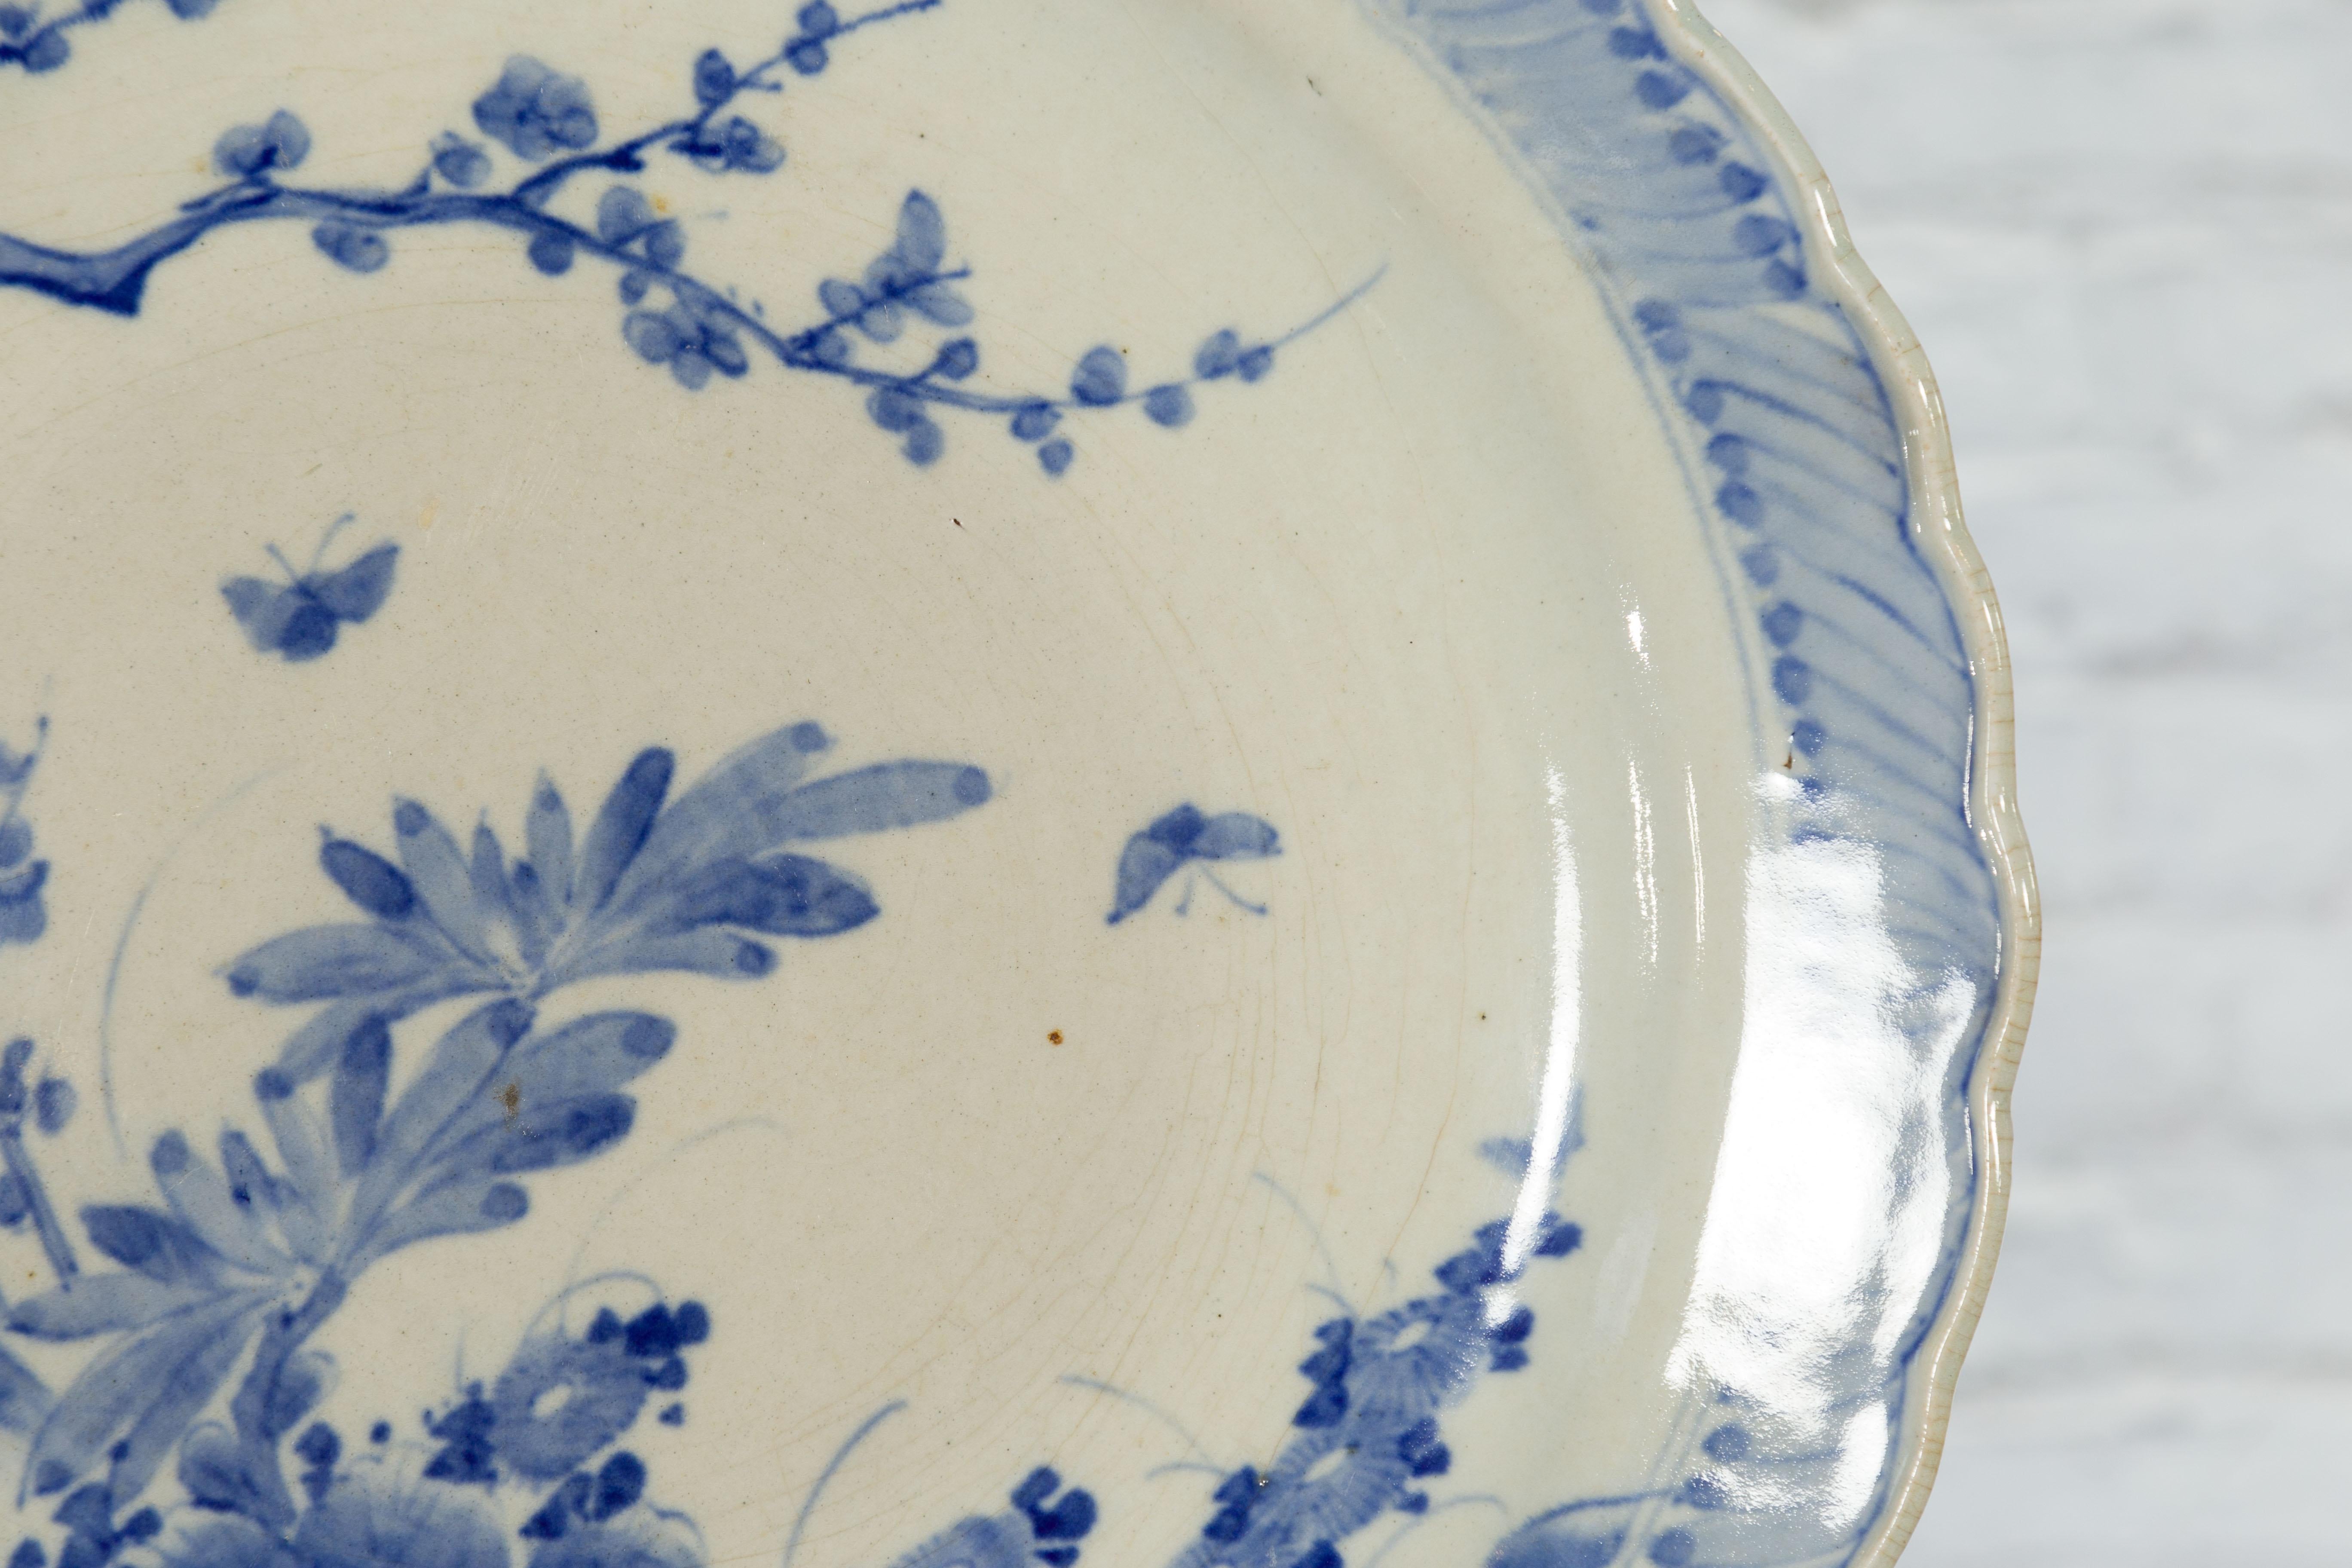 Japanese Hand-Painted Blue and White Porcelain Charger Plate with Foliage Décor For Sale 8